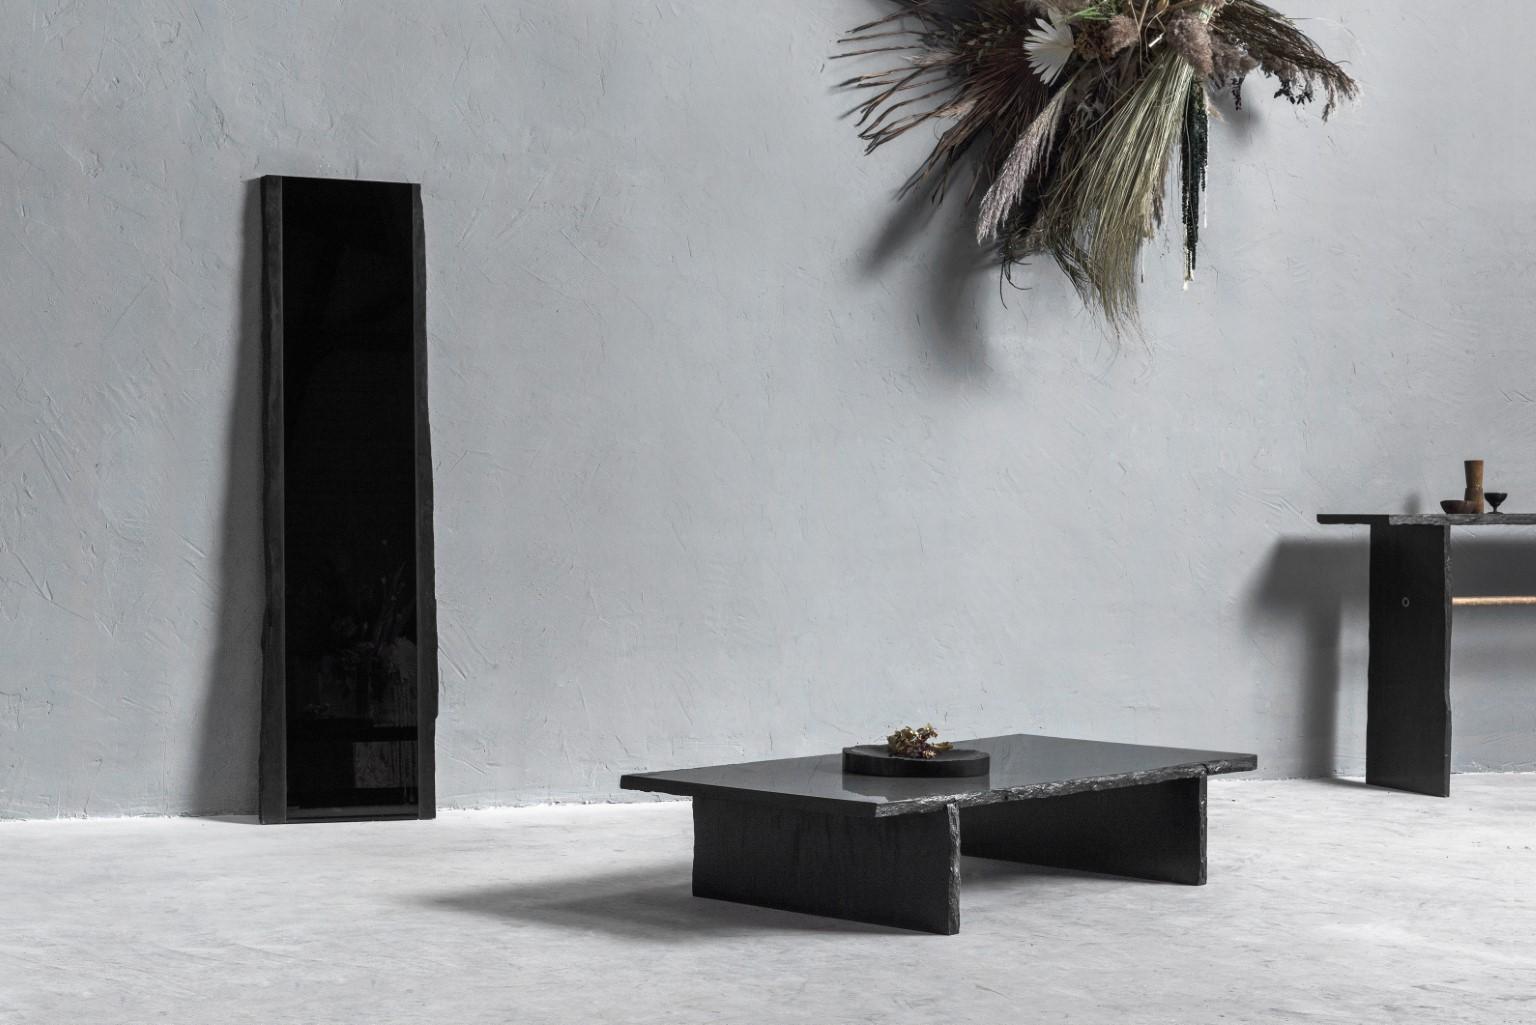 Black slate sculpted low table by Frederic Saulou
Frustre II
Black slate 
Measures: L 160 x W 70 x H 30 cm, approximately 150 kg
Limited edition of 12
Signed and numbered.

